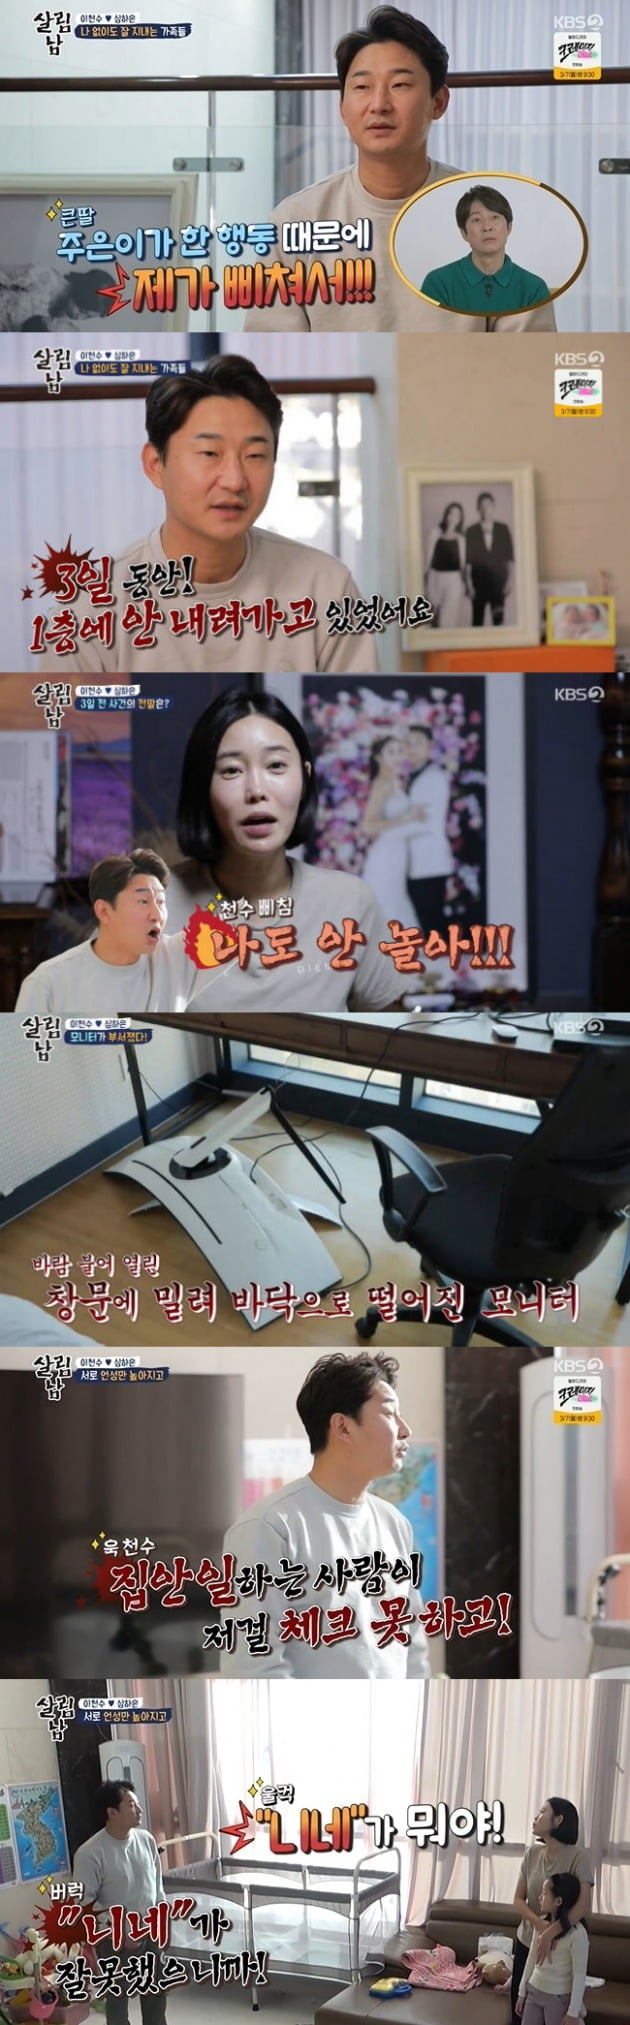 The reason why former footballer Lee Chun-soo chipped in the room for three days has been revealed.Lee Chun-soo appeared as a new Salimnam in KBS2 entertainment Saving Men Season 2 (hereinafter referred to as Mr. House Husband 2), which was broadcast on the 19th.On the second floor of the double-story home, Lee Chun-soo, who spends his time alone eating raw ramen alone, was featured.Lee Chun-soo, who mostly spends time watching TV in his room on days without schedule.As for why he did not go down to the first floor, he said, I was not going down to the first floor because of the behavior of my eldest daughter, Ju-eun.There are toilets, and there is no big problem except lonely ones. His wife, Shim Ha-eun, said, I was excited that my acquaintance promised to ride a bicycle with Ju-eun.Suddenly, my husband was excited and wearing equipment. I told him that he was not going to go, and there were acquaintances, and he said, Yai, I do not play too!When my husband is twisted and sprained, I go to the room. In the past, I sent a long letter and comforted him. But it was too hard from someday after I had twins.Lee Chun-soo, who secretly went down to the first floor after ordering food with a delivery app, was eventually discovered by his daughter and tried to make a diversion in a computer room.Then Lee Chun-soo began to get irritated, loudly calling his wifes name when she saw the monitor smashed to the floor by a wind blowing open window.Its a 1.7 million won monitor Ive never written before, and after two months of setting it, I decided I should write it now, but I fell down, and I felt so bad, he explained.Why are you opening the door without cleaning it? A house worker can not check it and do what he does?Shim Ha-eun said, I do not even come in here. I did not open the door.As the voice grew higher and higher, Shim Ha-eun pointed out Lee Chun-soos attitude of shouting in front of the children, but Lee Chun-soo was angry that you did wrong.Lee Chun-soo told the production team: Its a style I spit without thinking and when I talk, I get to put on Ya, which is a habit.Shim Ha-eun told her 10-year-old daughter, Father was a person who exercised. It is a strong expression when communicating in athletes.Were talking to us all the time, so we understand, and Father has to fix it, and we have to talk to Father more.Shim Ha-eun, who visited Lee Chun-soos room, said, If you feel bad, you say you without hesitation. Then the children are scared.Lee Chun-soo shouted, Im lonely and hard too - you guys dont even think of me - were you interested in whether you died here or lived here for three days?Once youve got to talk to the Lord and reduce your screaming, Shim Ha-eun advised, you dont like him, either.However, Lee Chun-soo said, How many times did I do it? And Shim Ha-eun said, Its going to be 10 years.Eventually, Shim Ha-eun left the room and poured tears, saying, The arrogance I feel is hurt by my husbands tone.Lee Chun-soo said: I live under one roof but I feel like two families, I feel so heartbroken at the thought of not permeating my family.I want to be a good father good husband who communicates a lot, not just my husband. 